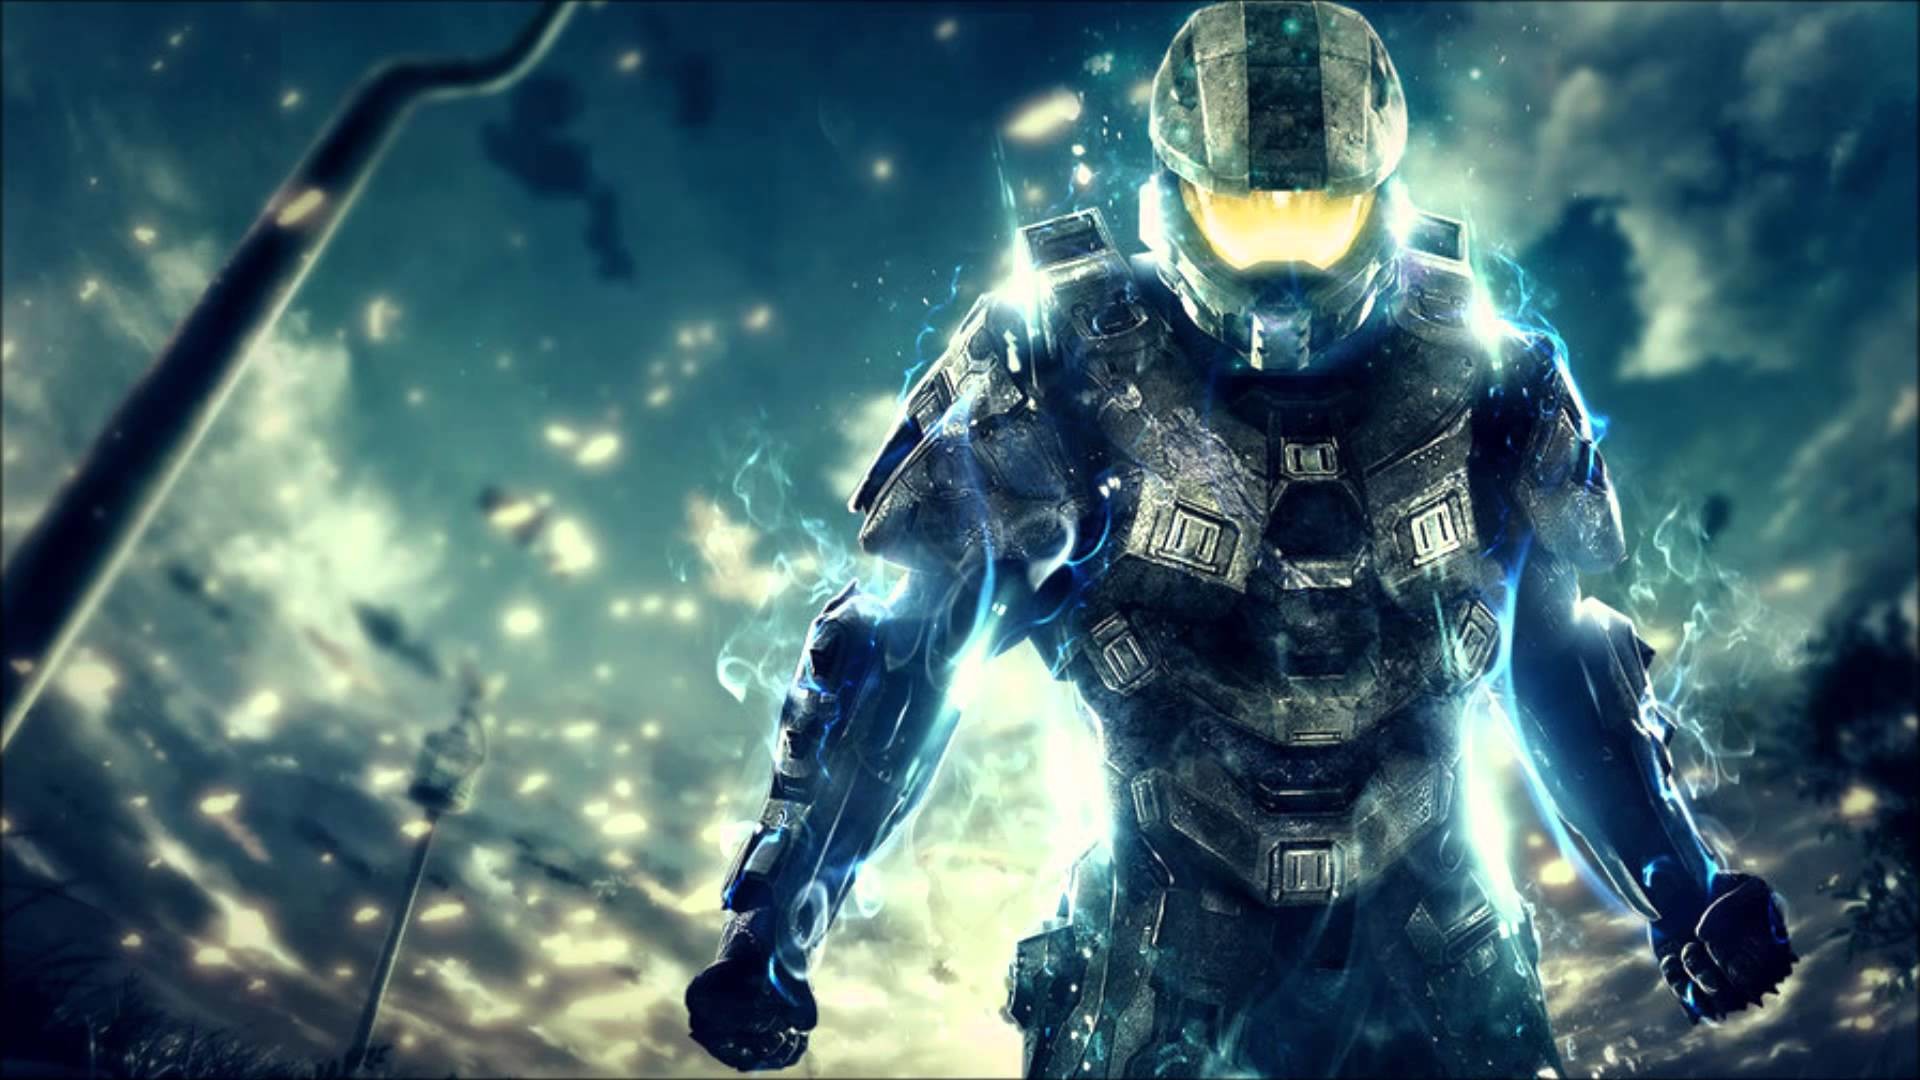 Cool Halo 4 Wallpapers (64+ images)